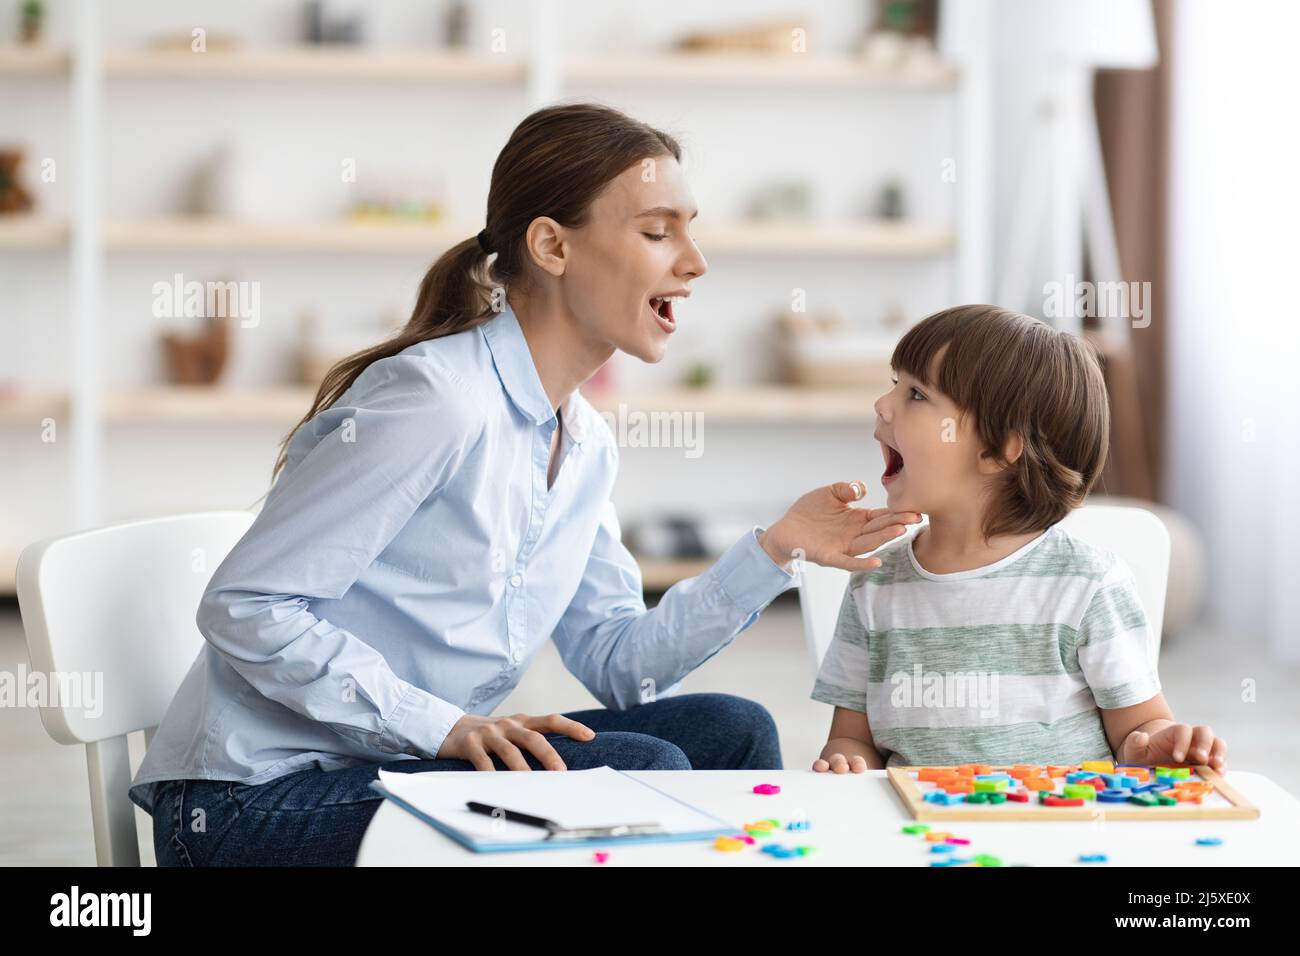 Professional woman speech therapist helping little boy to pronounce right sounds, showing mouth articulation Stock Photo